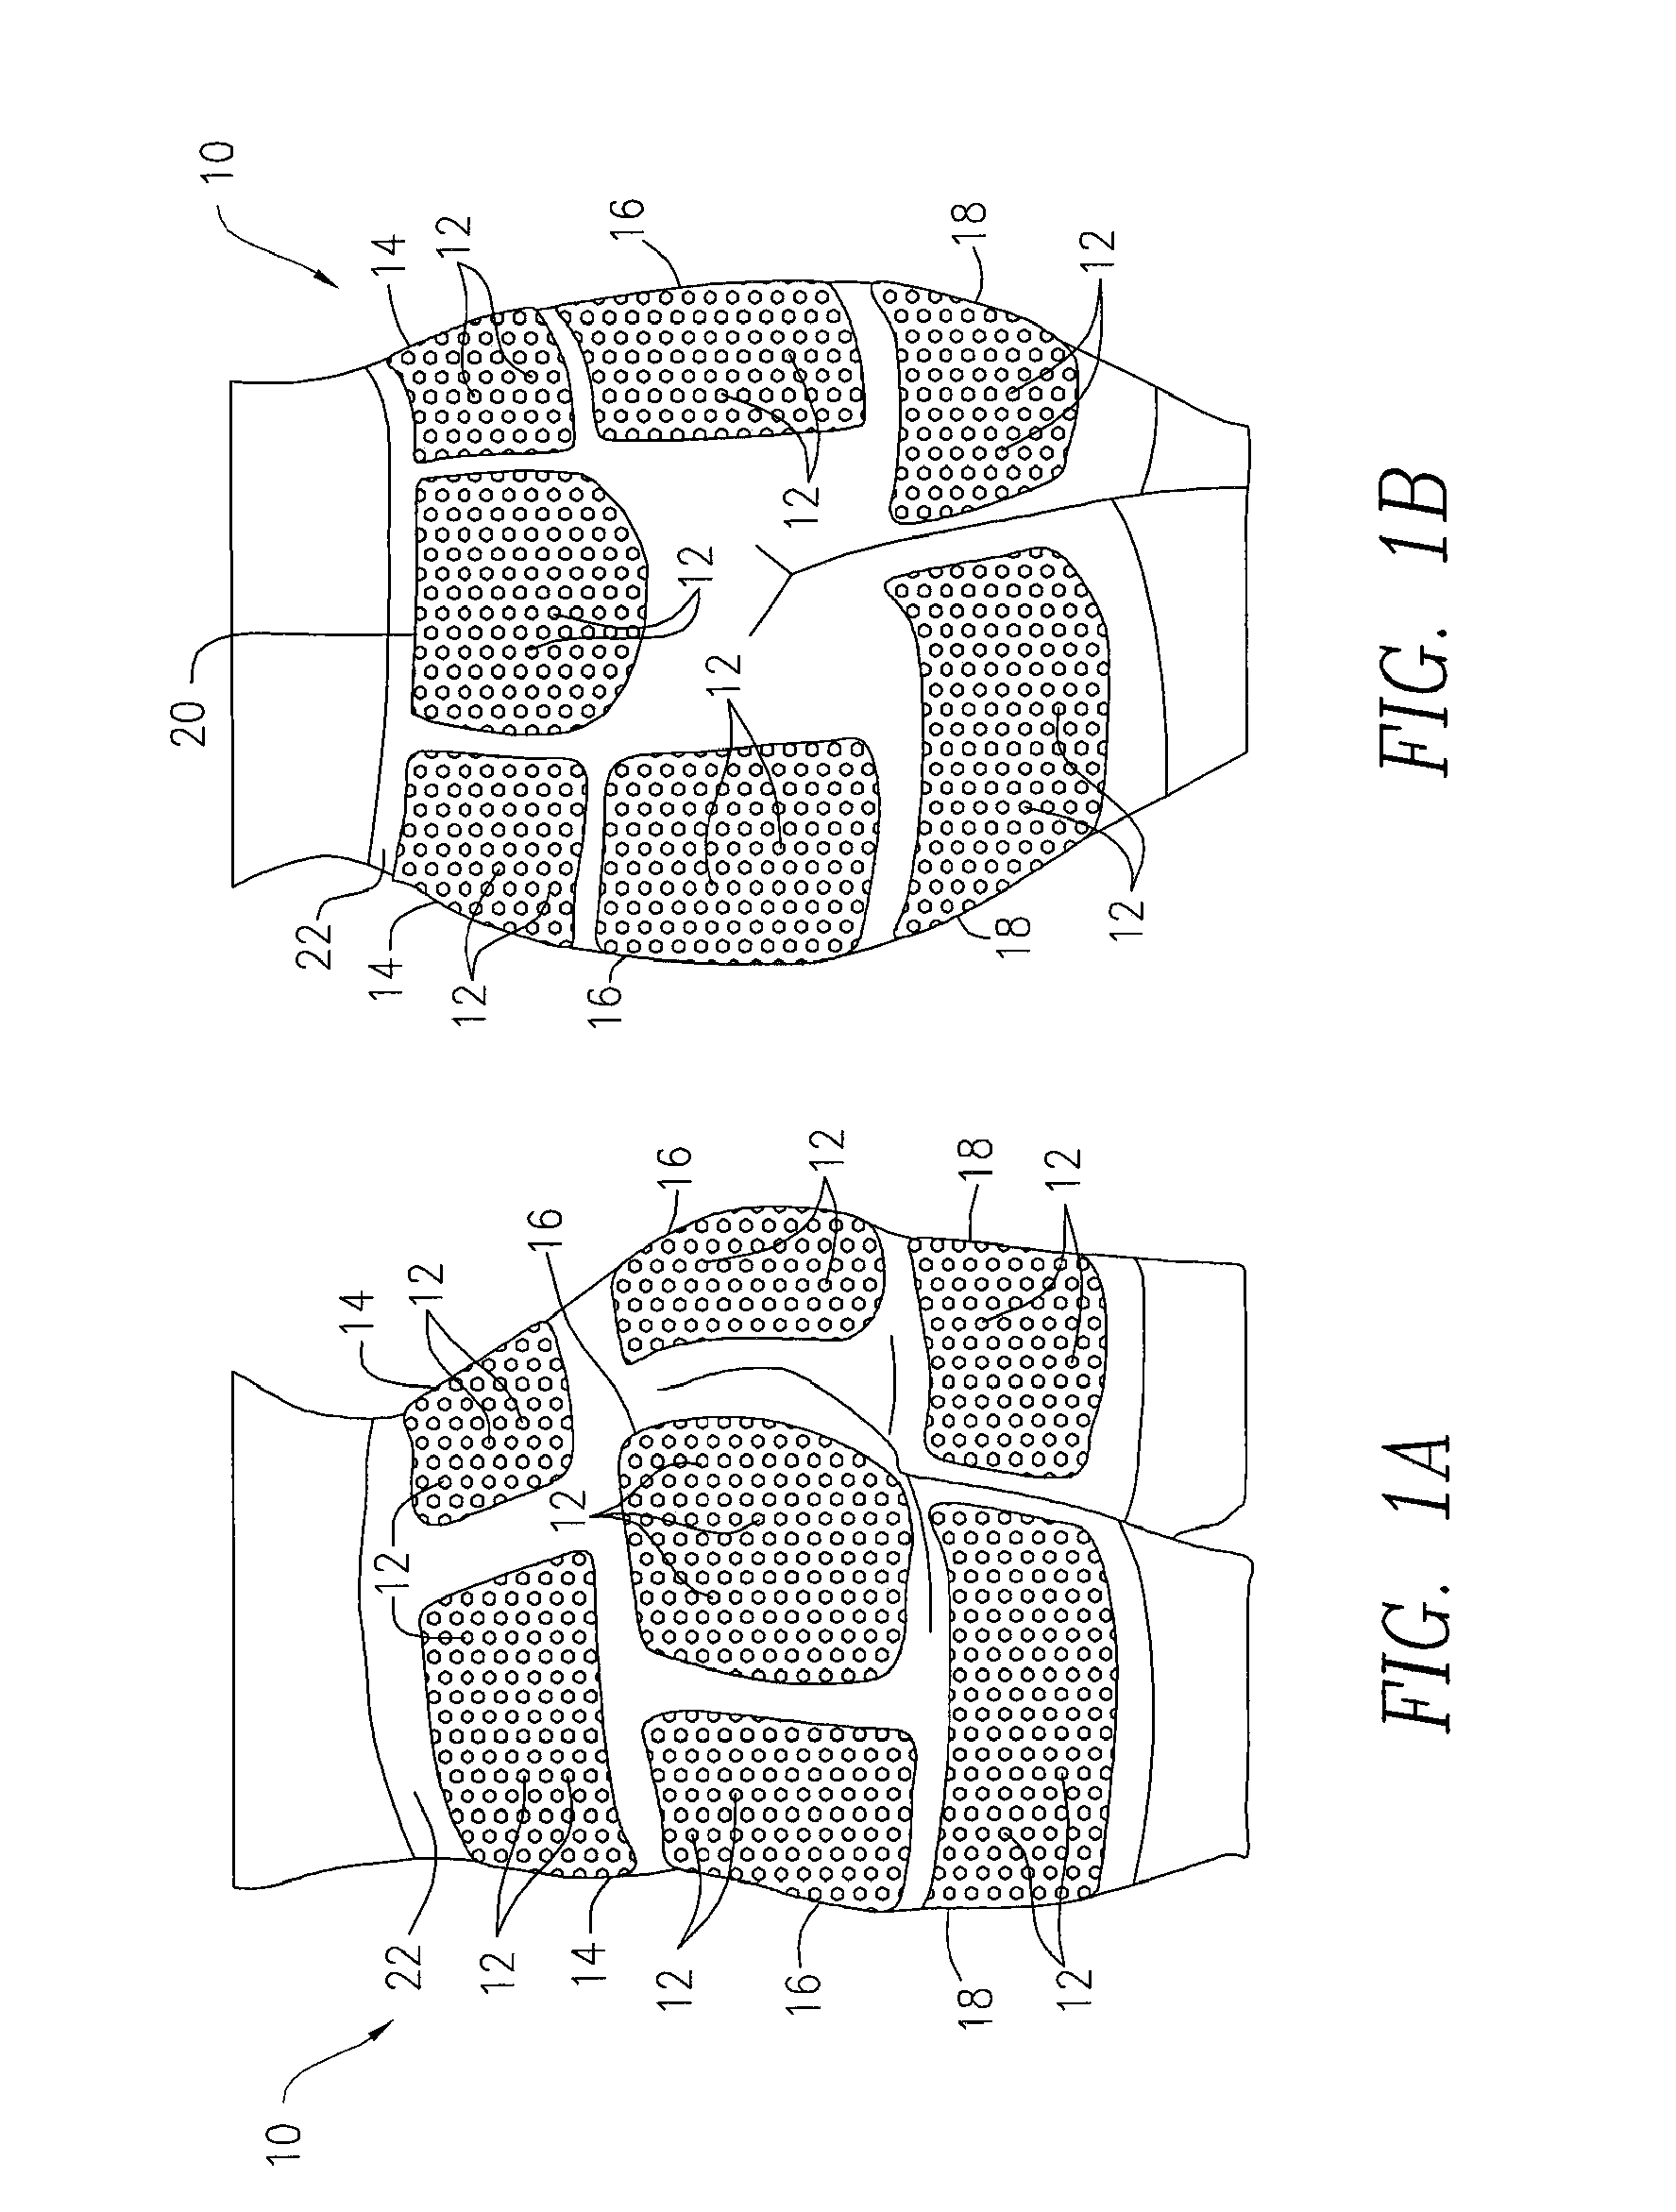 Ultrasonically Assisted Fitness Method and Apparatus